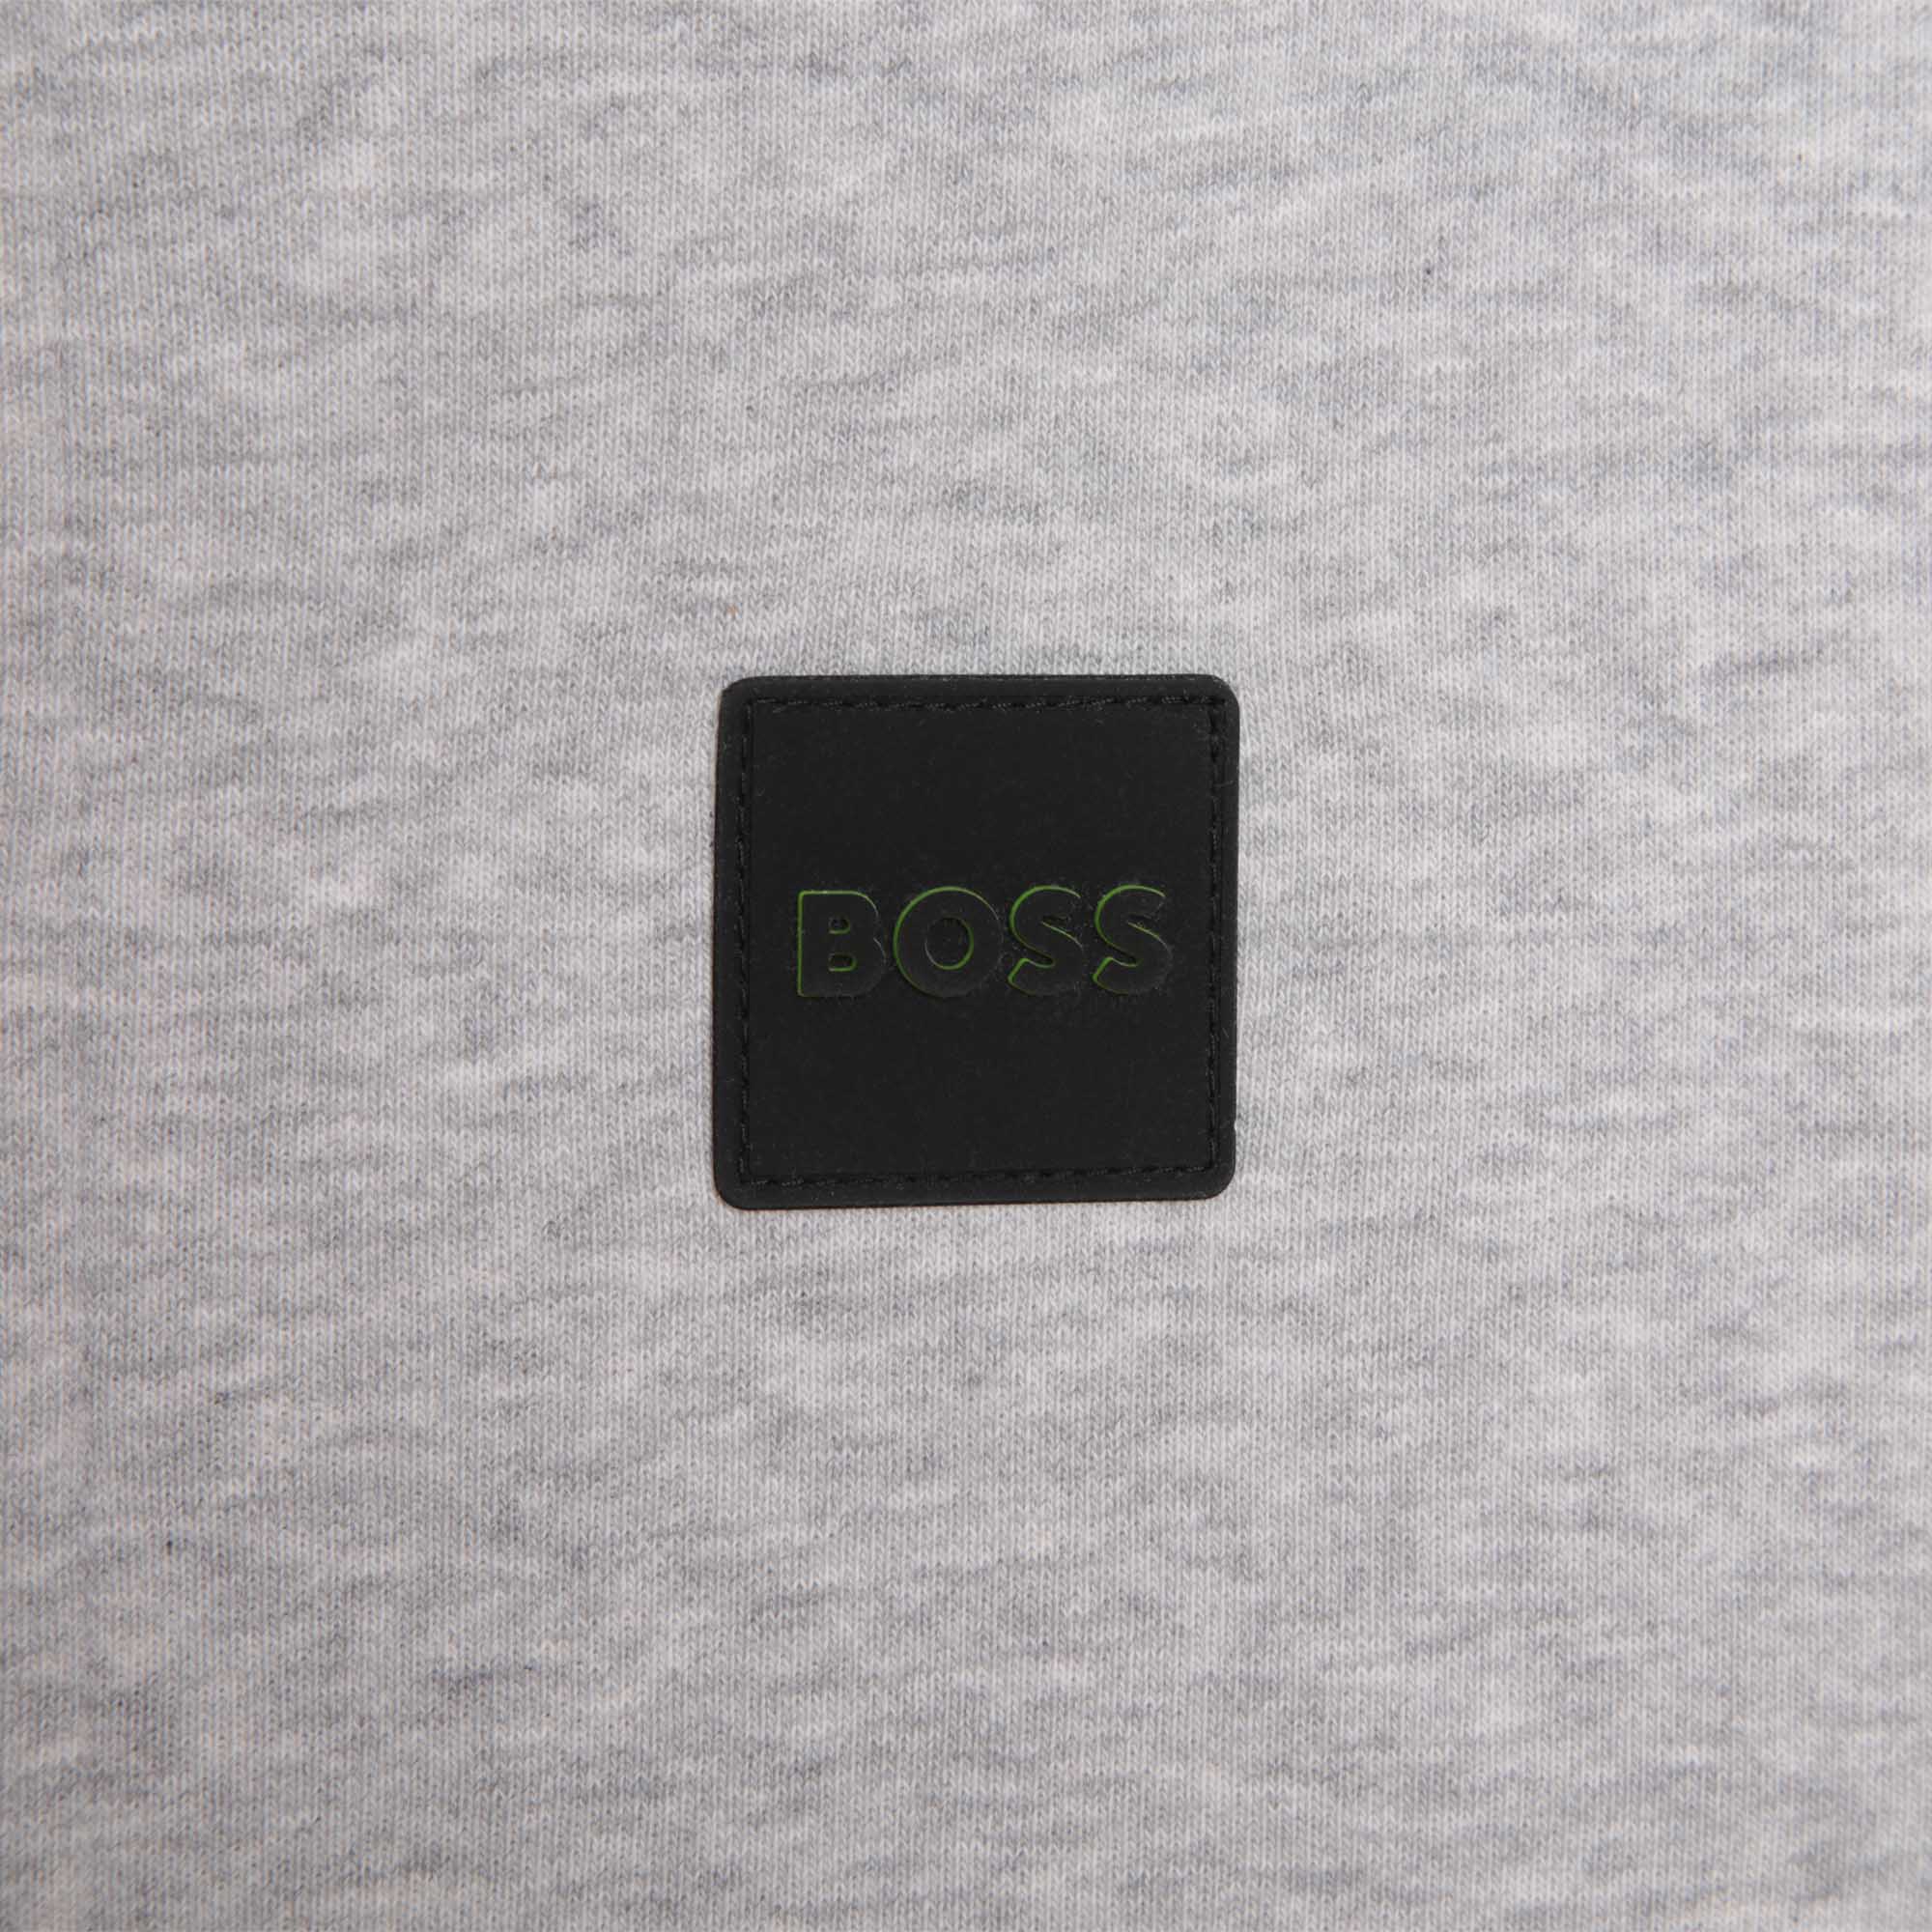 Boss boys pale grey hoodie with logo close up